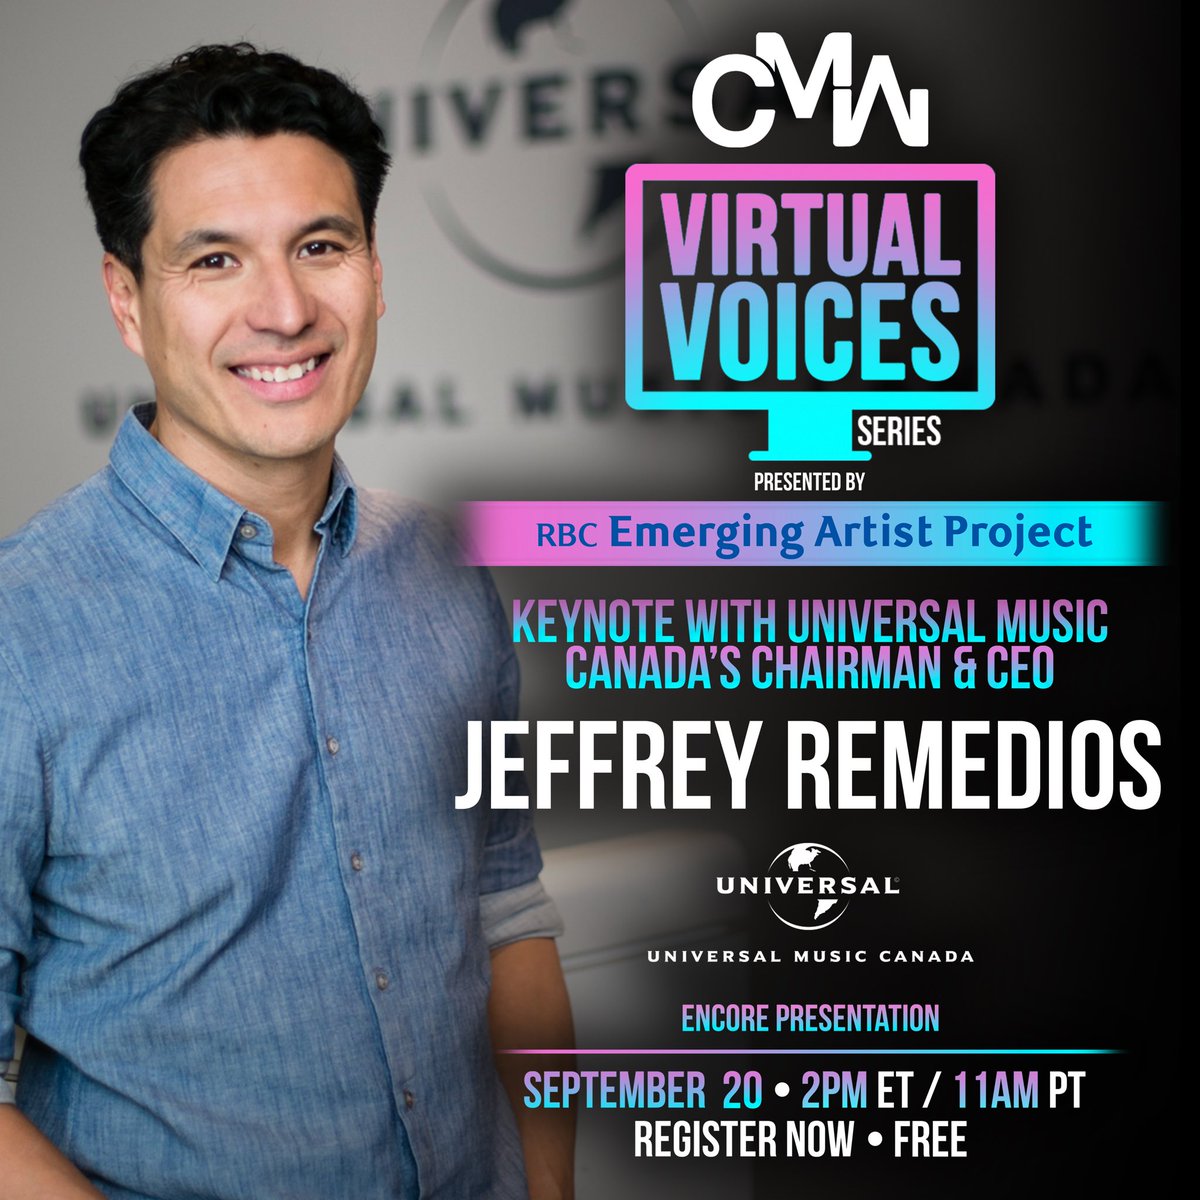 Virtual Voices is back with an encore presentation of Universal Music Canada’s Chairman & CEO Jeffrey Remedios. Tune in next Tuesday September 20th at 2pm ET. Register now -> bit.ly/3Ql0e1X